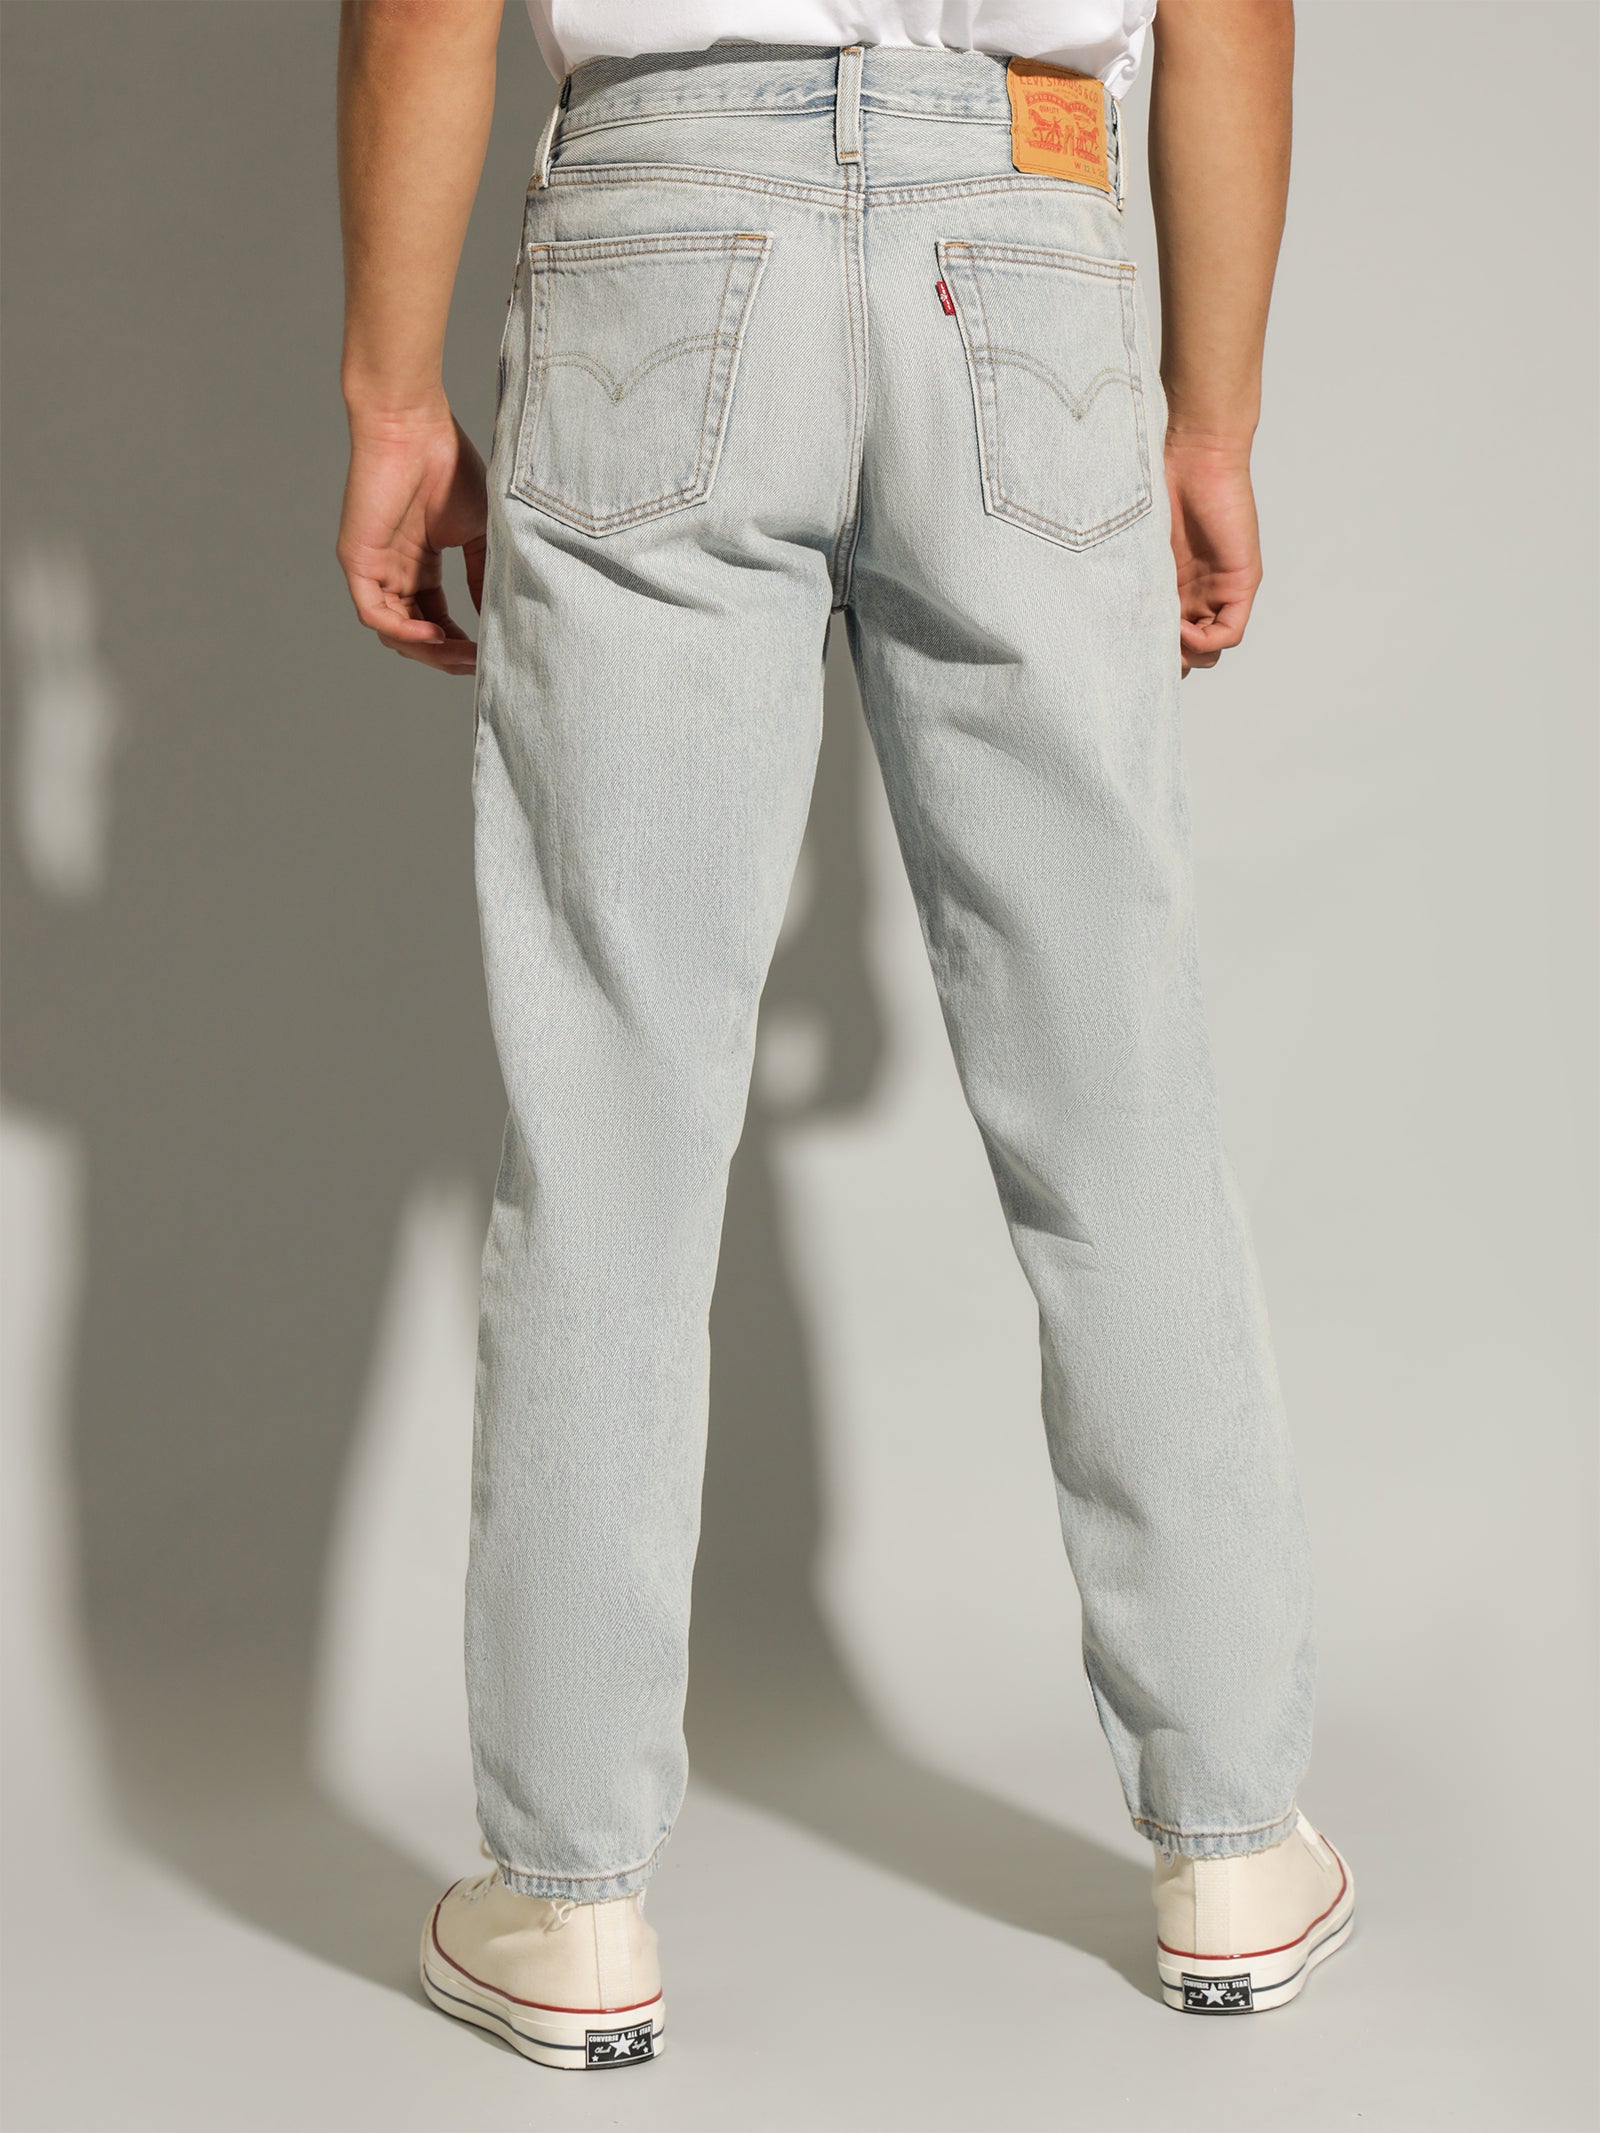 500 92' Tapered Jeans in Relaxed In The Waves - Glue Store